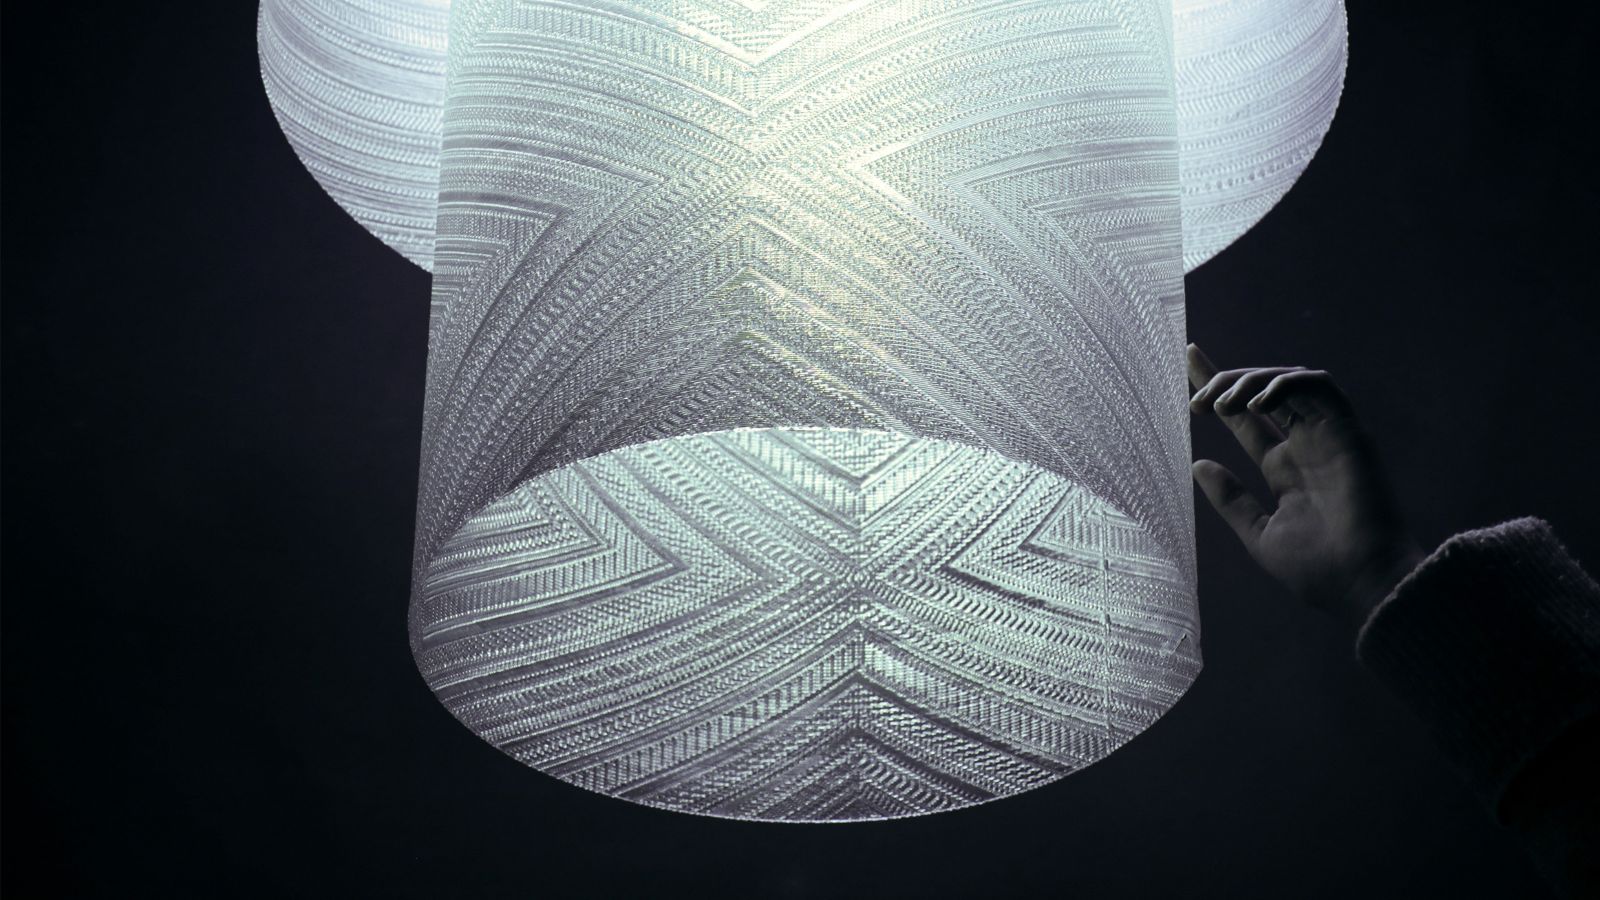 Image of a 3D printed textured light shade with a hand reaching for it.